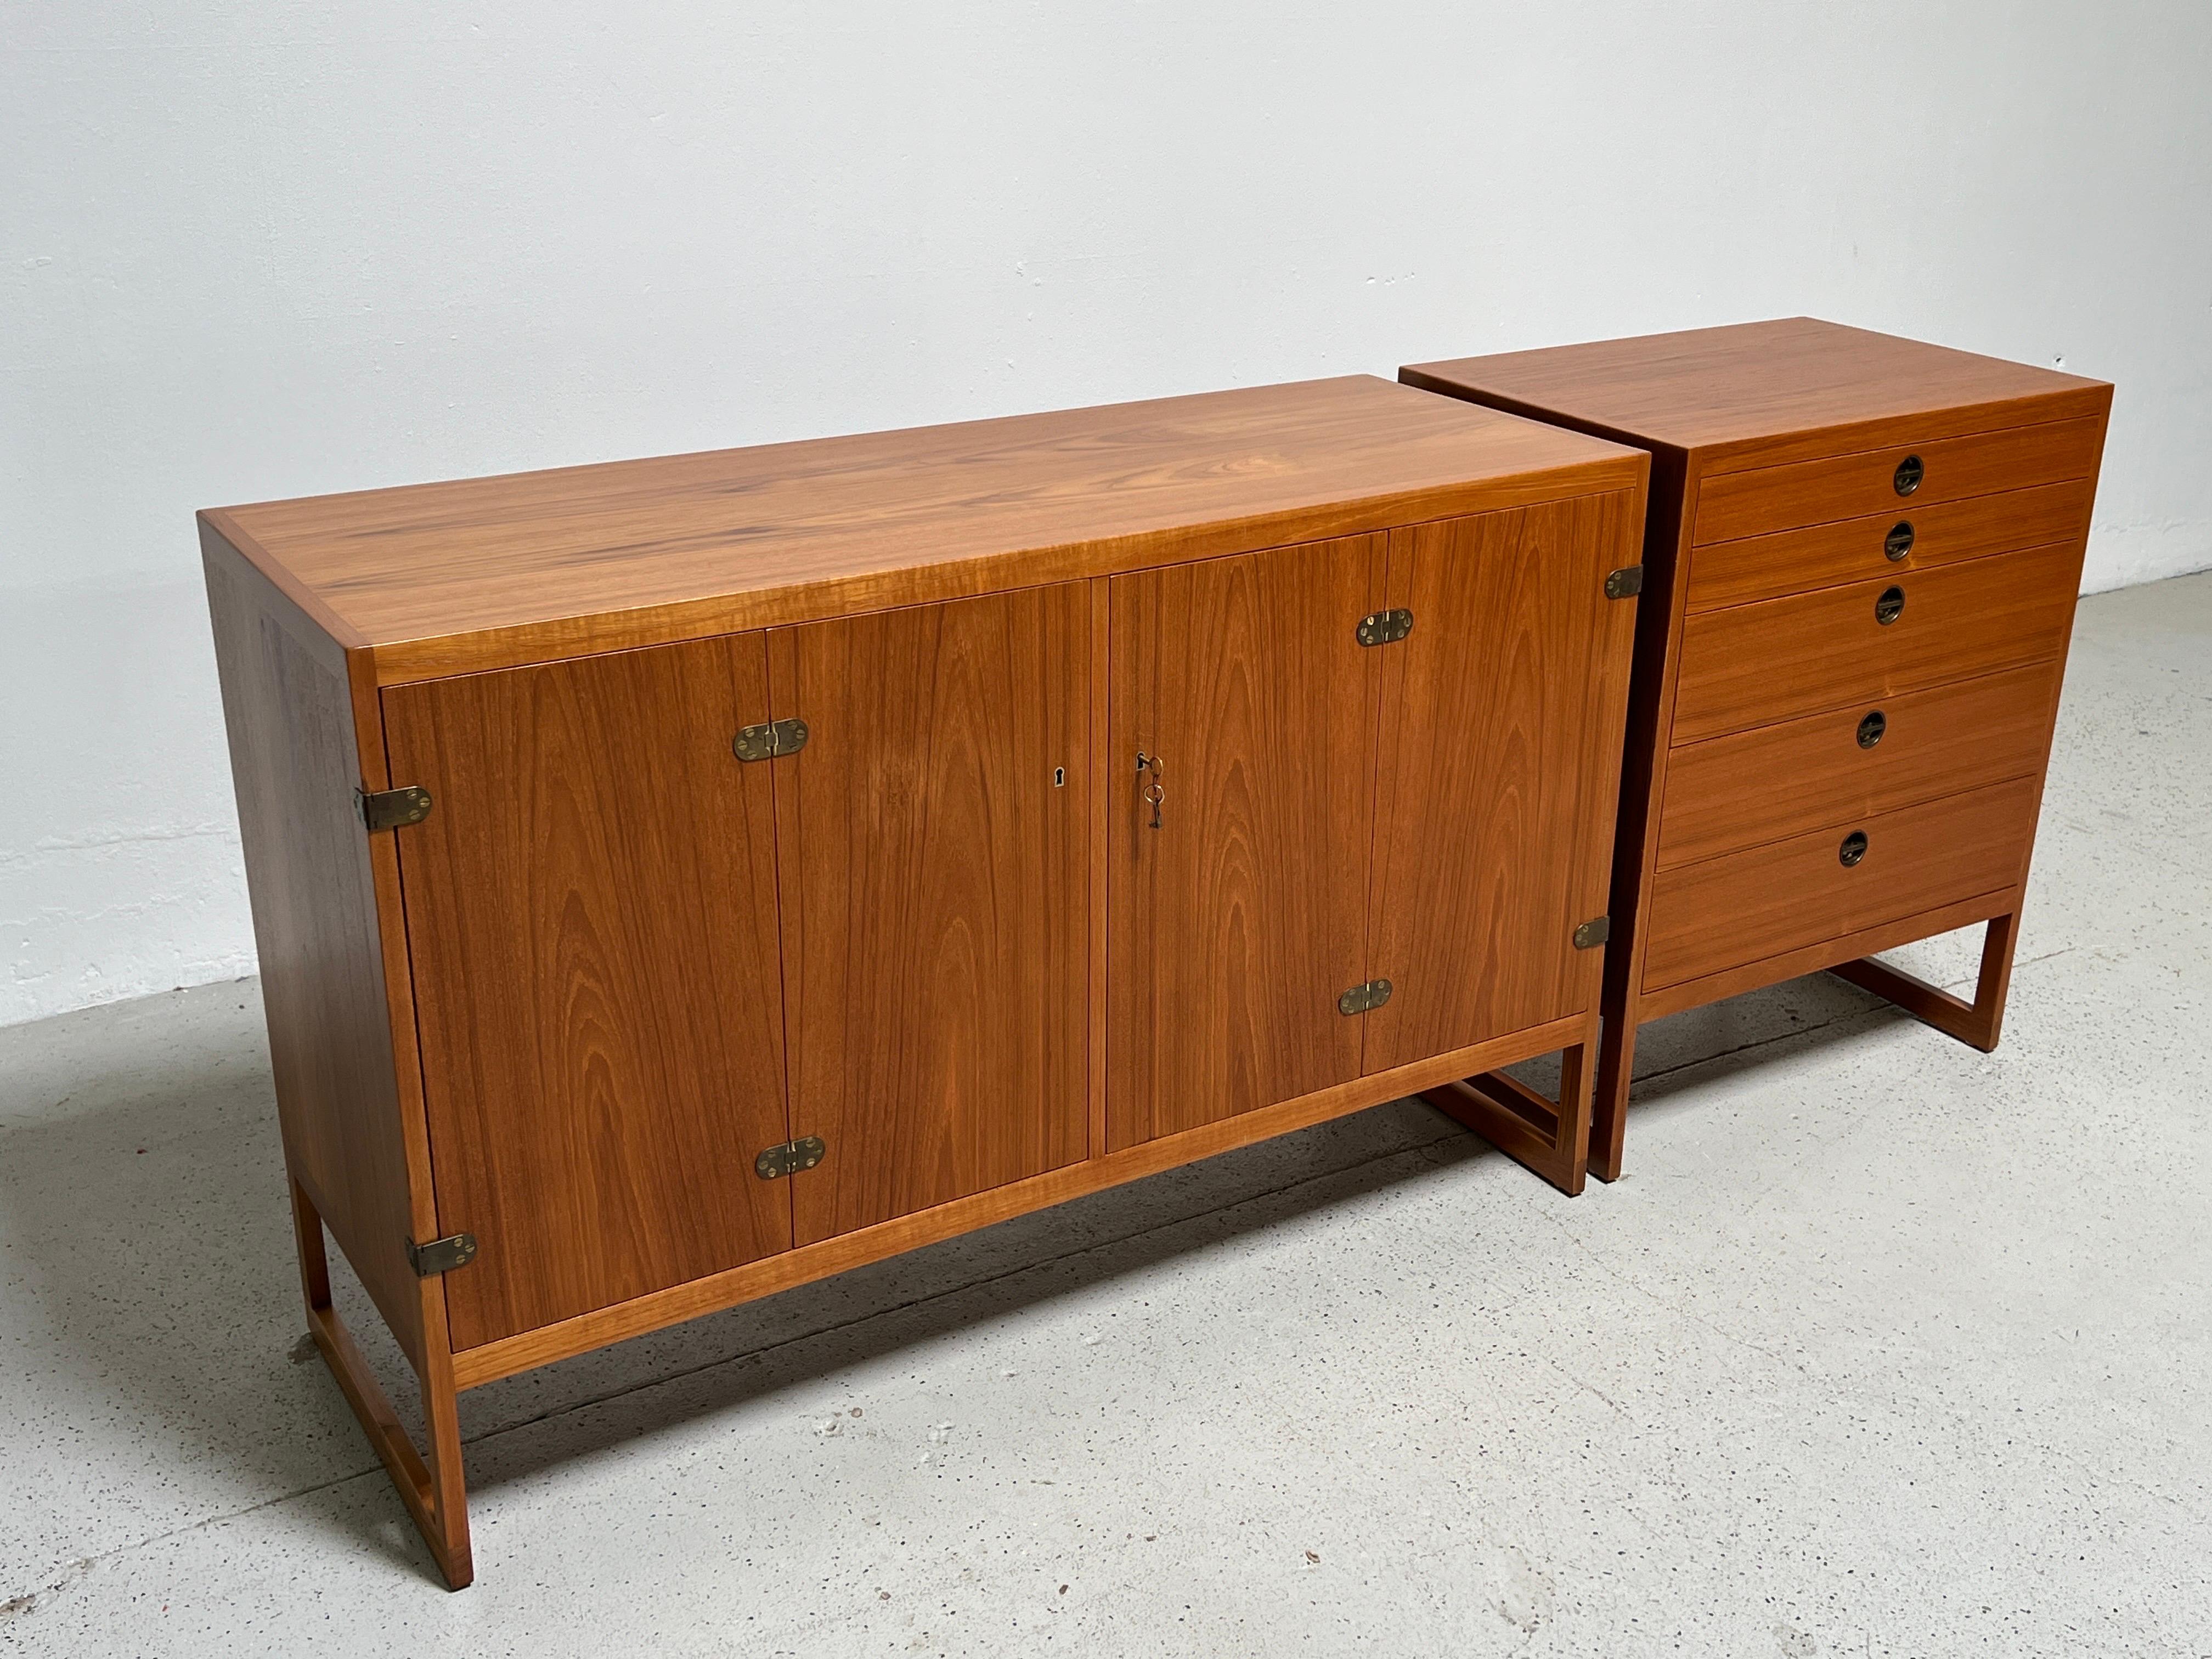 A pair of teak cabinets designed by Børge Mogensen 1957, manufactured by cabinetmaker P. Lauritsen & Son. 
Measures: Large cabinet: 54.25